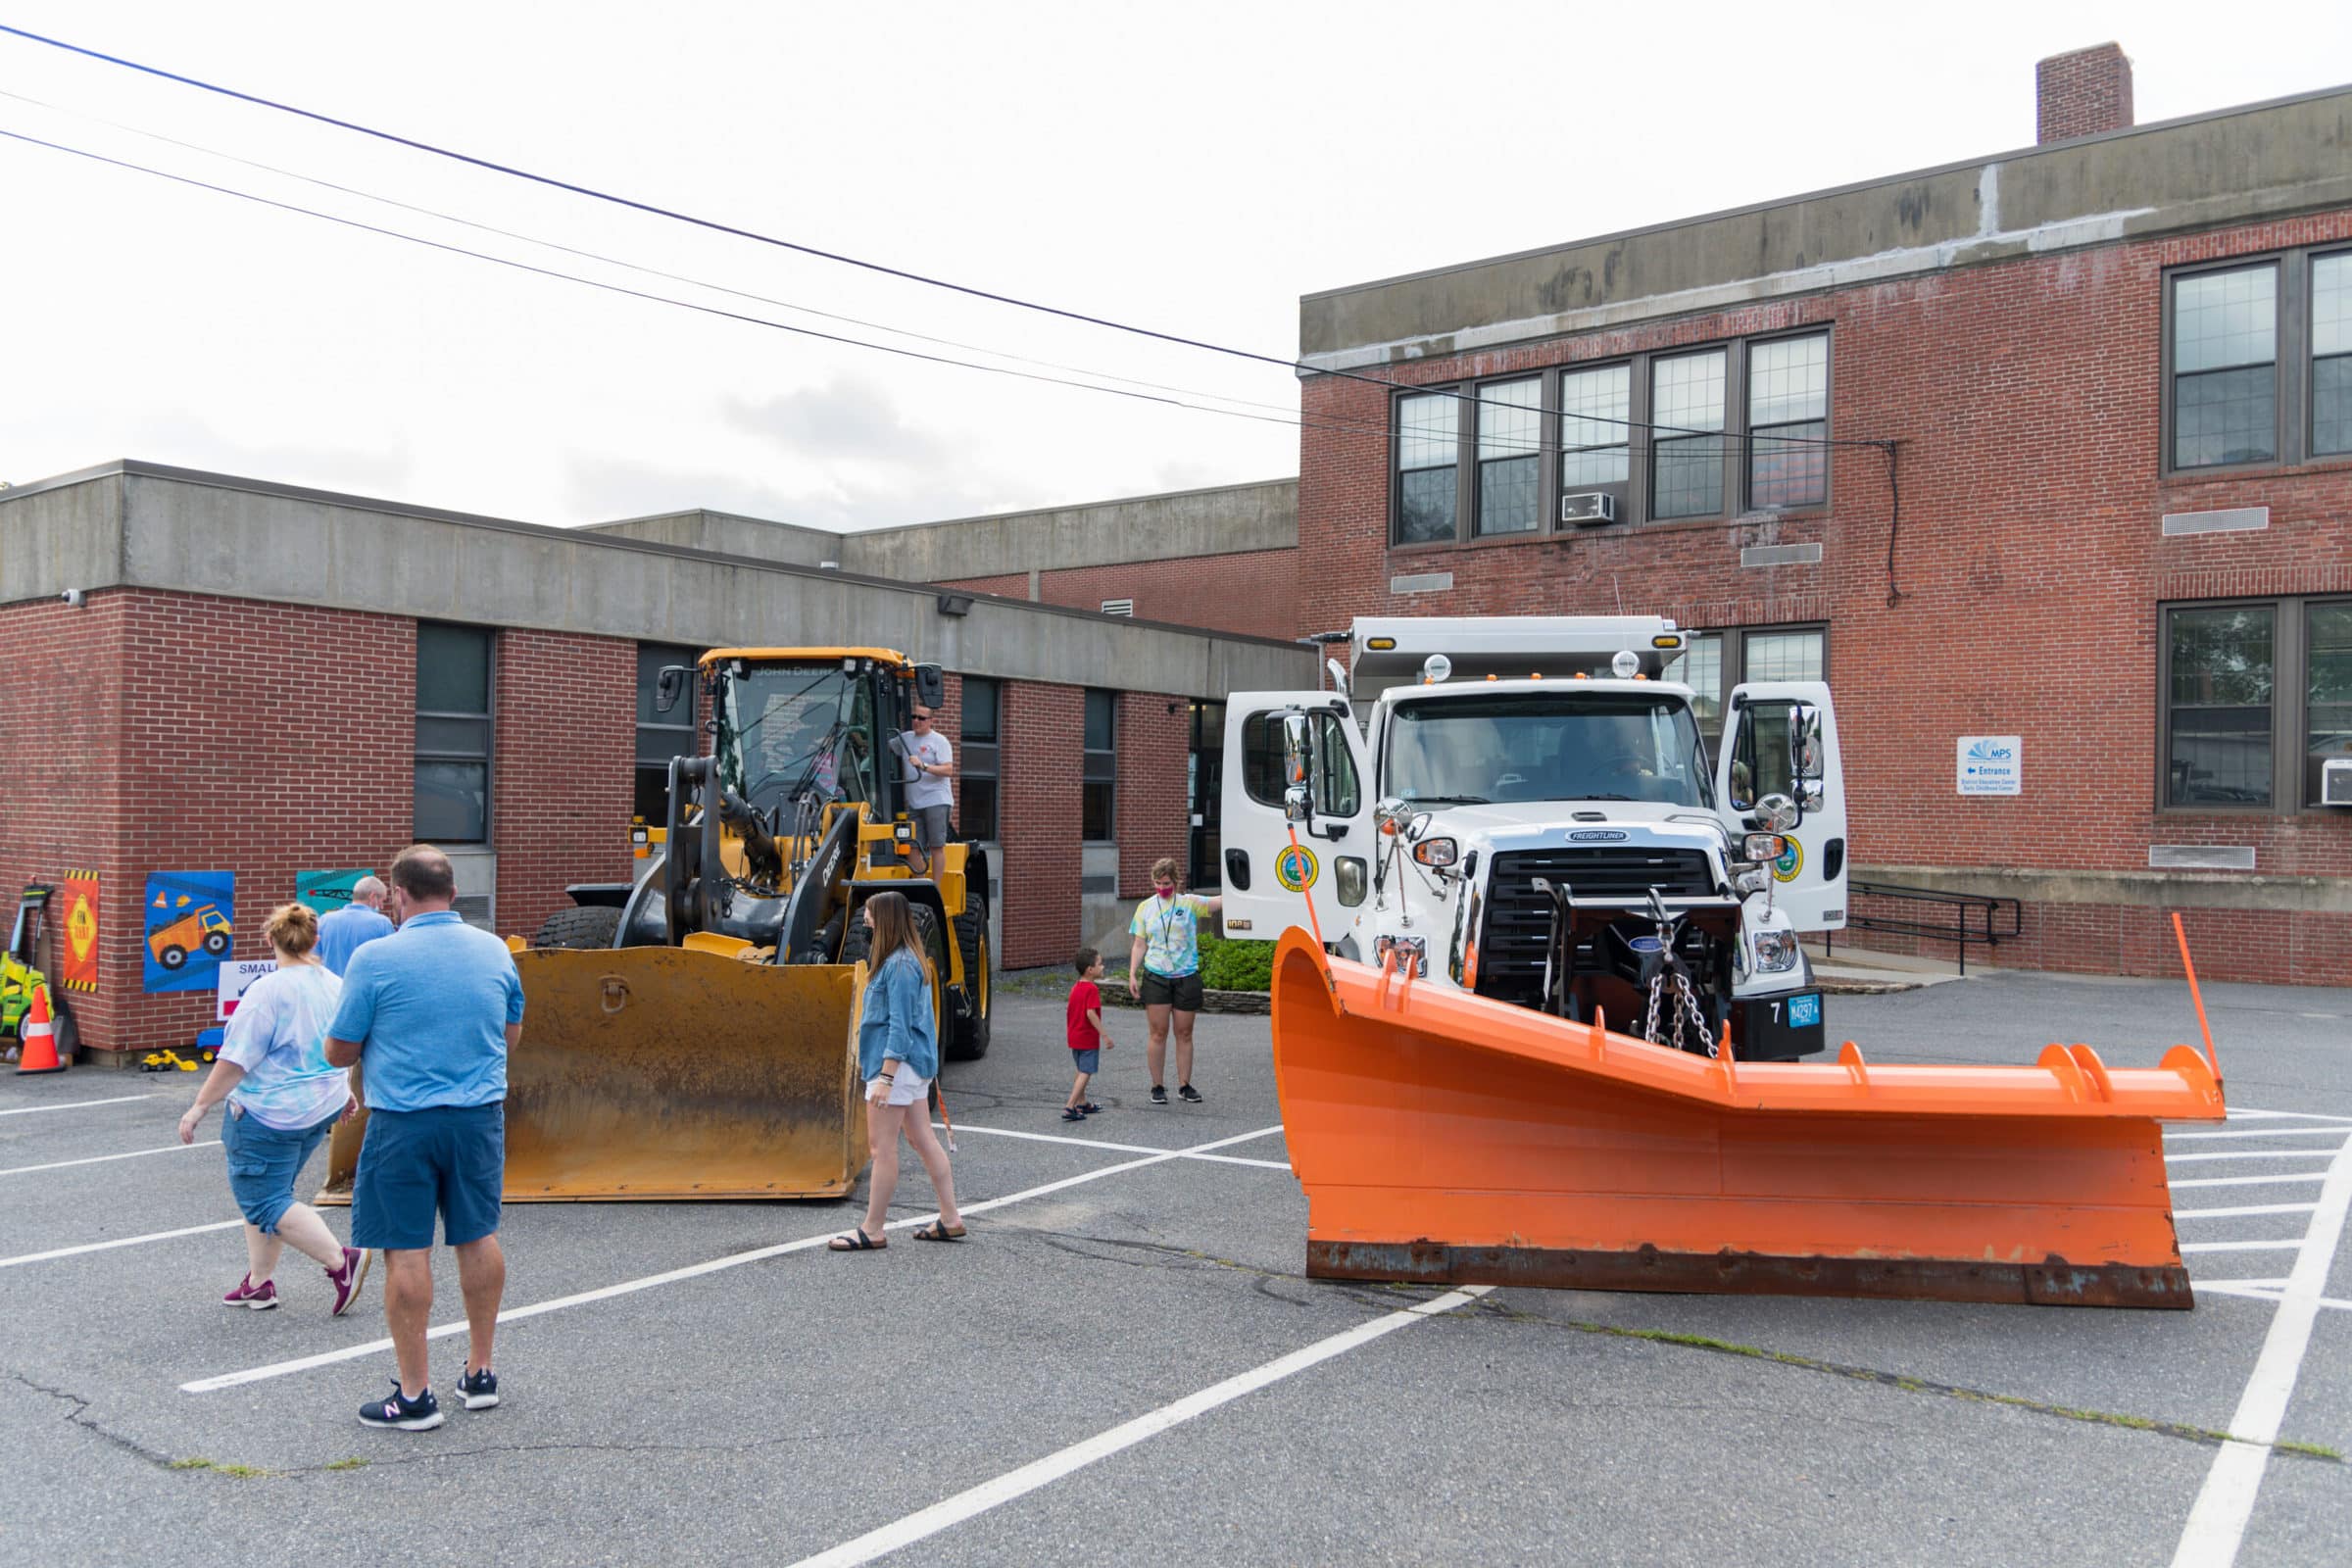 Marlborough’s Early Childhood Center hosts ‘touch-a-truck’ event